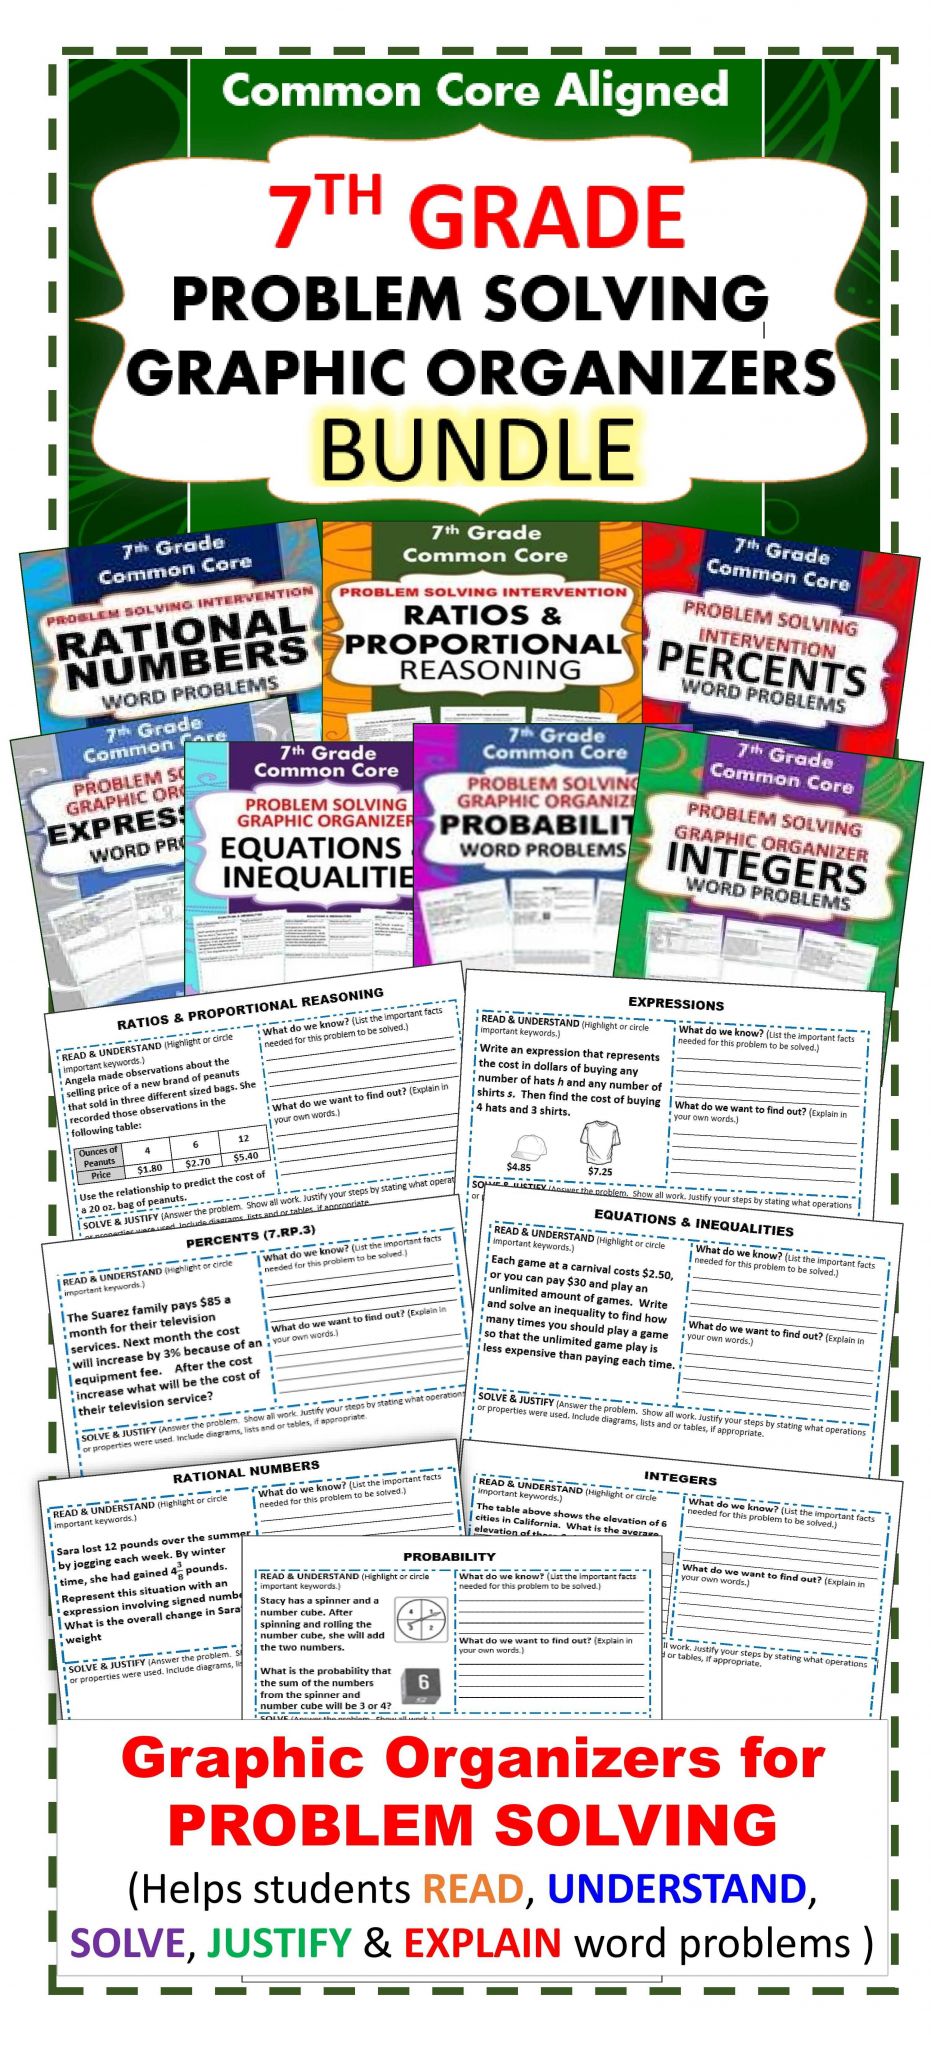 Adding and Subtracting Integers Word Problems Worksheet and 7th Grade Math Mon Core Word Problems with Graphic organizer